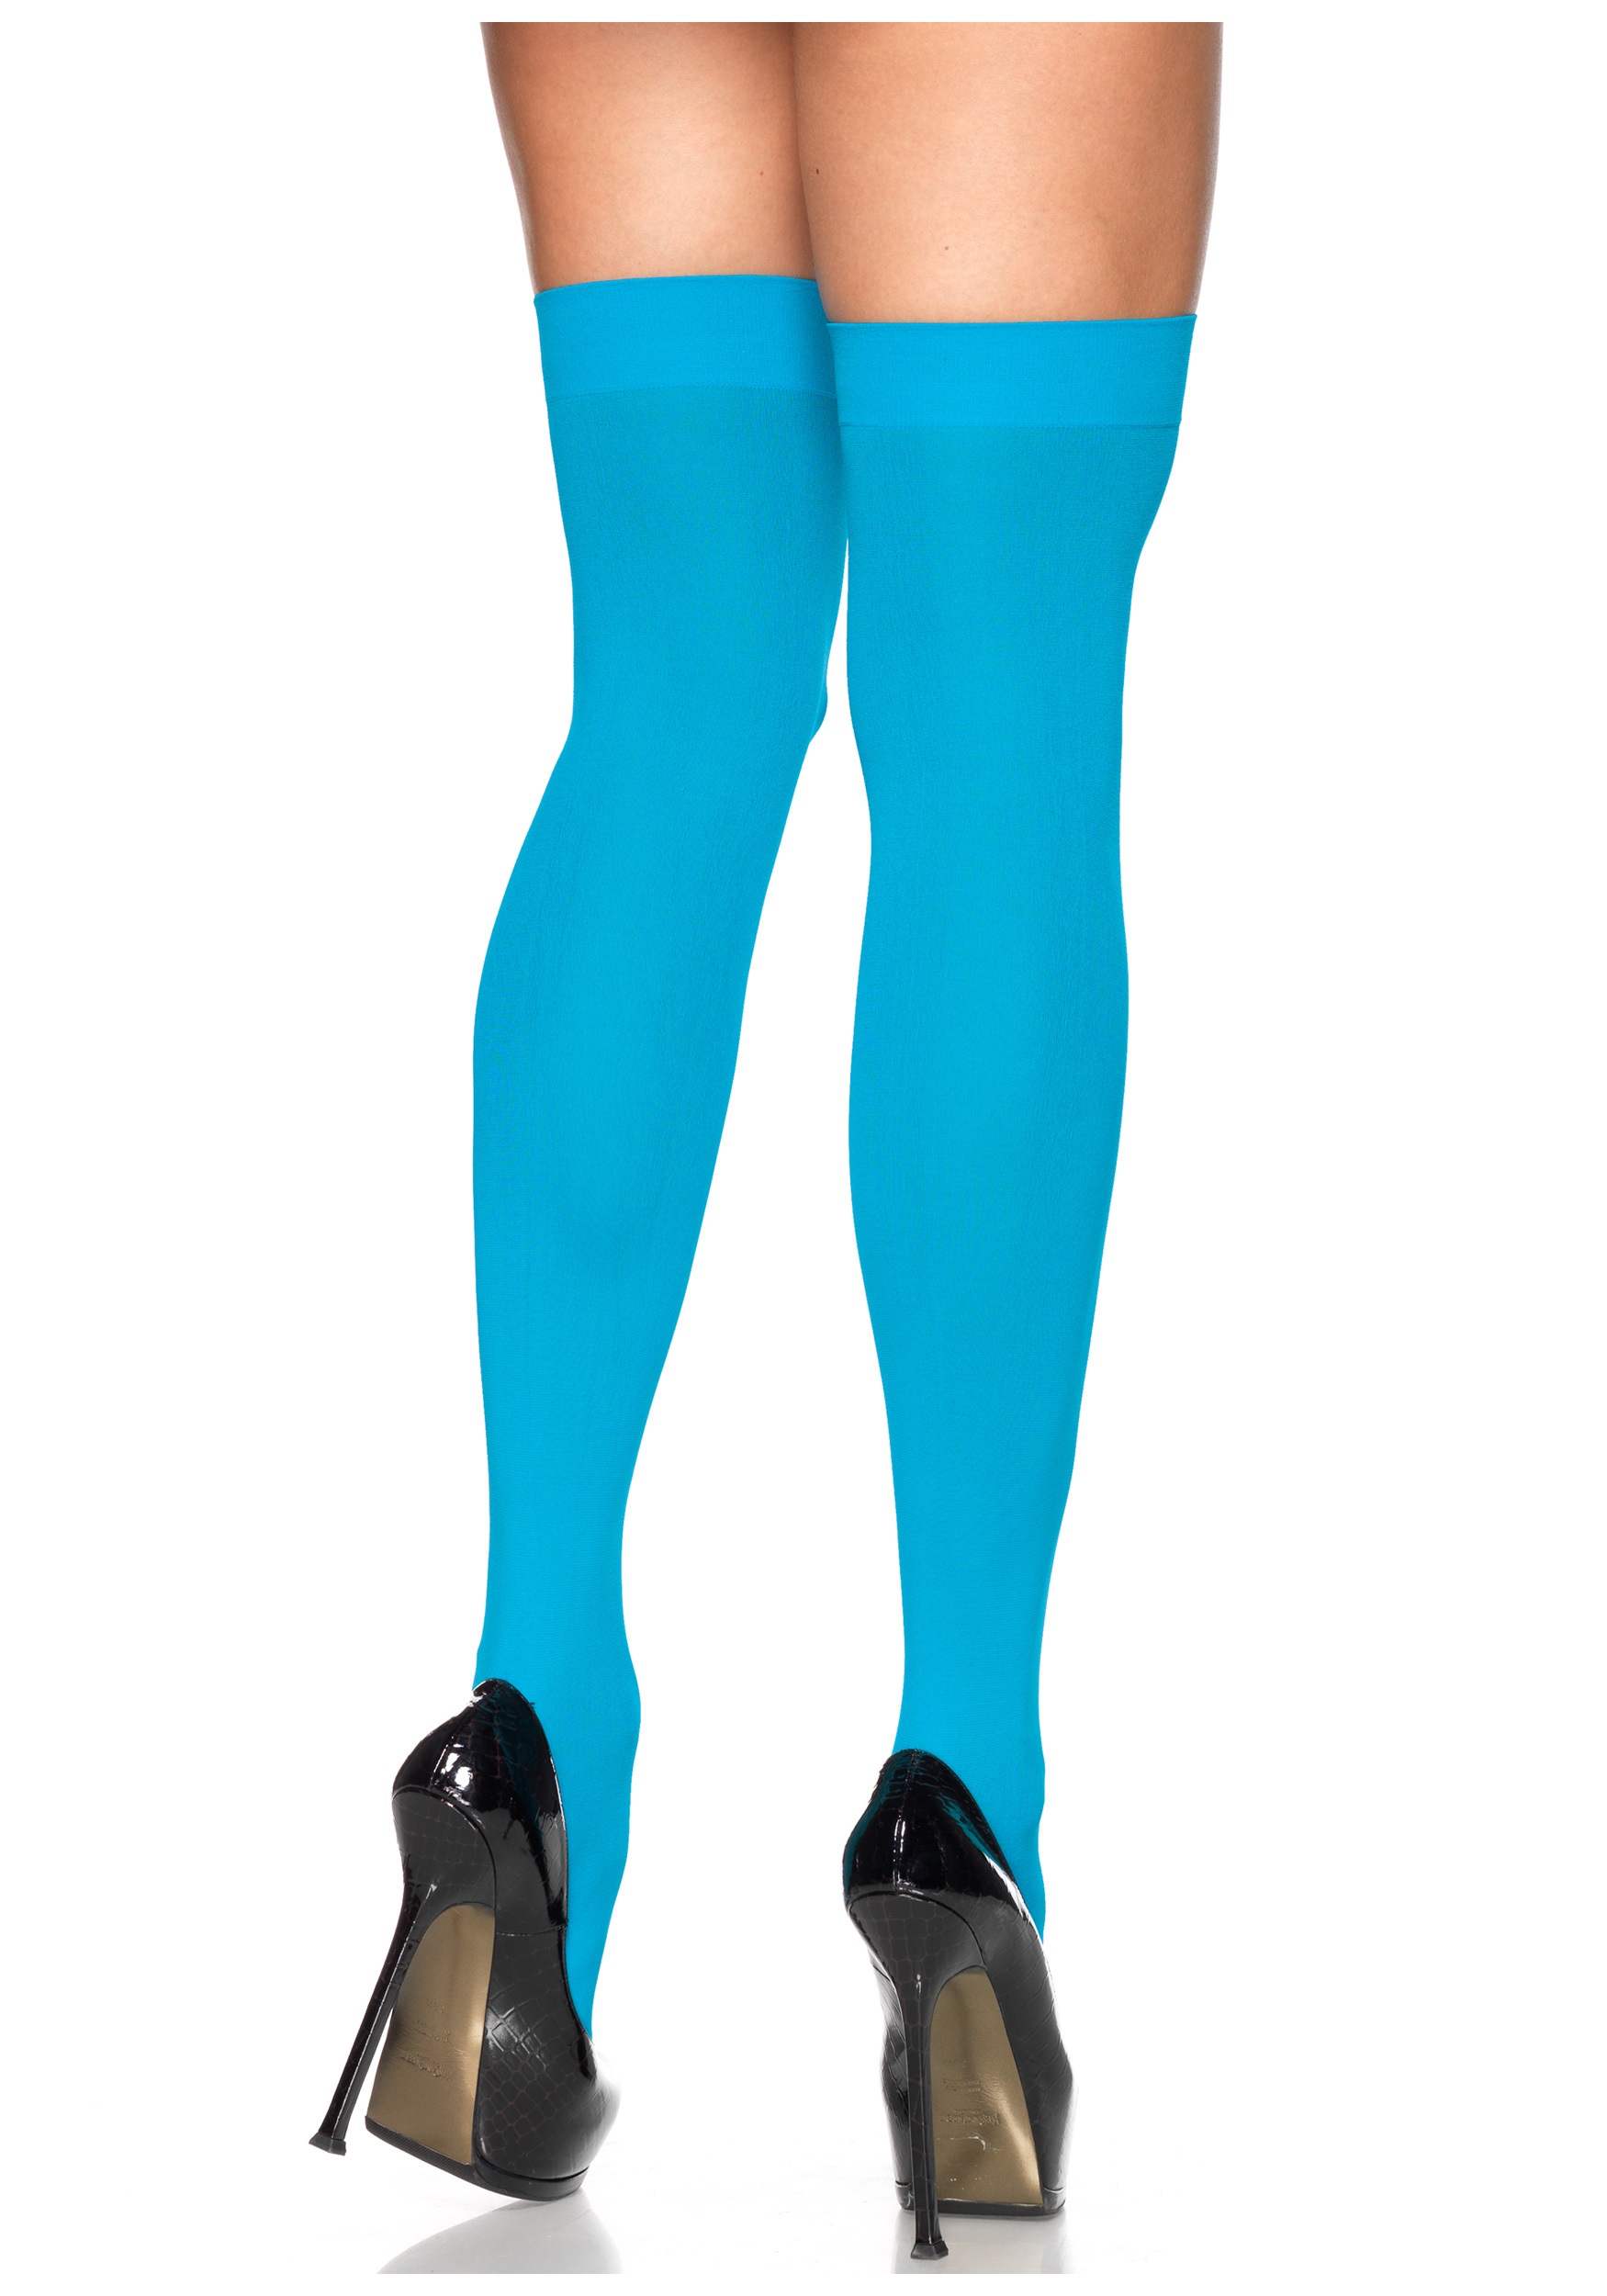 https://images.halloweencostumes.com/products/6616/1-1/neon-blue-thigh-high-stockings.jpg